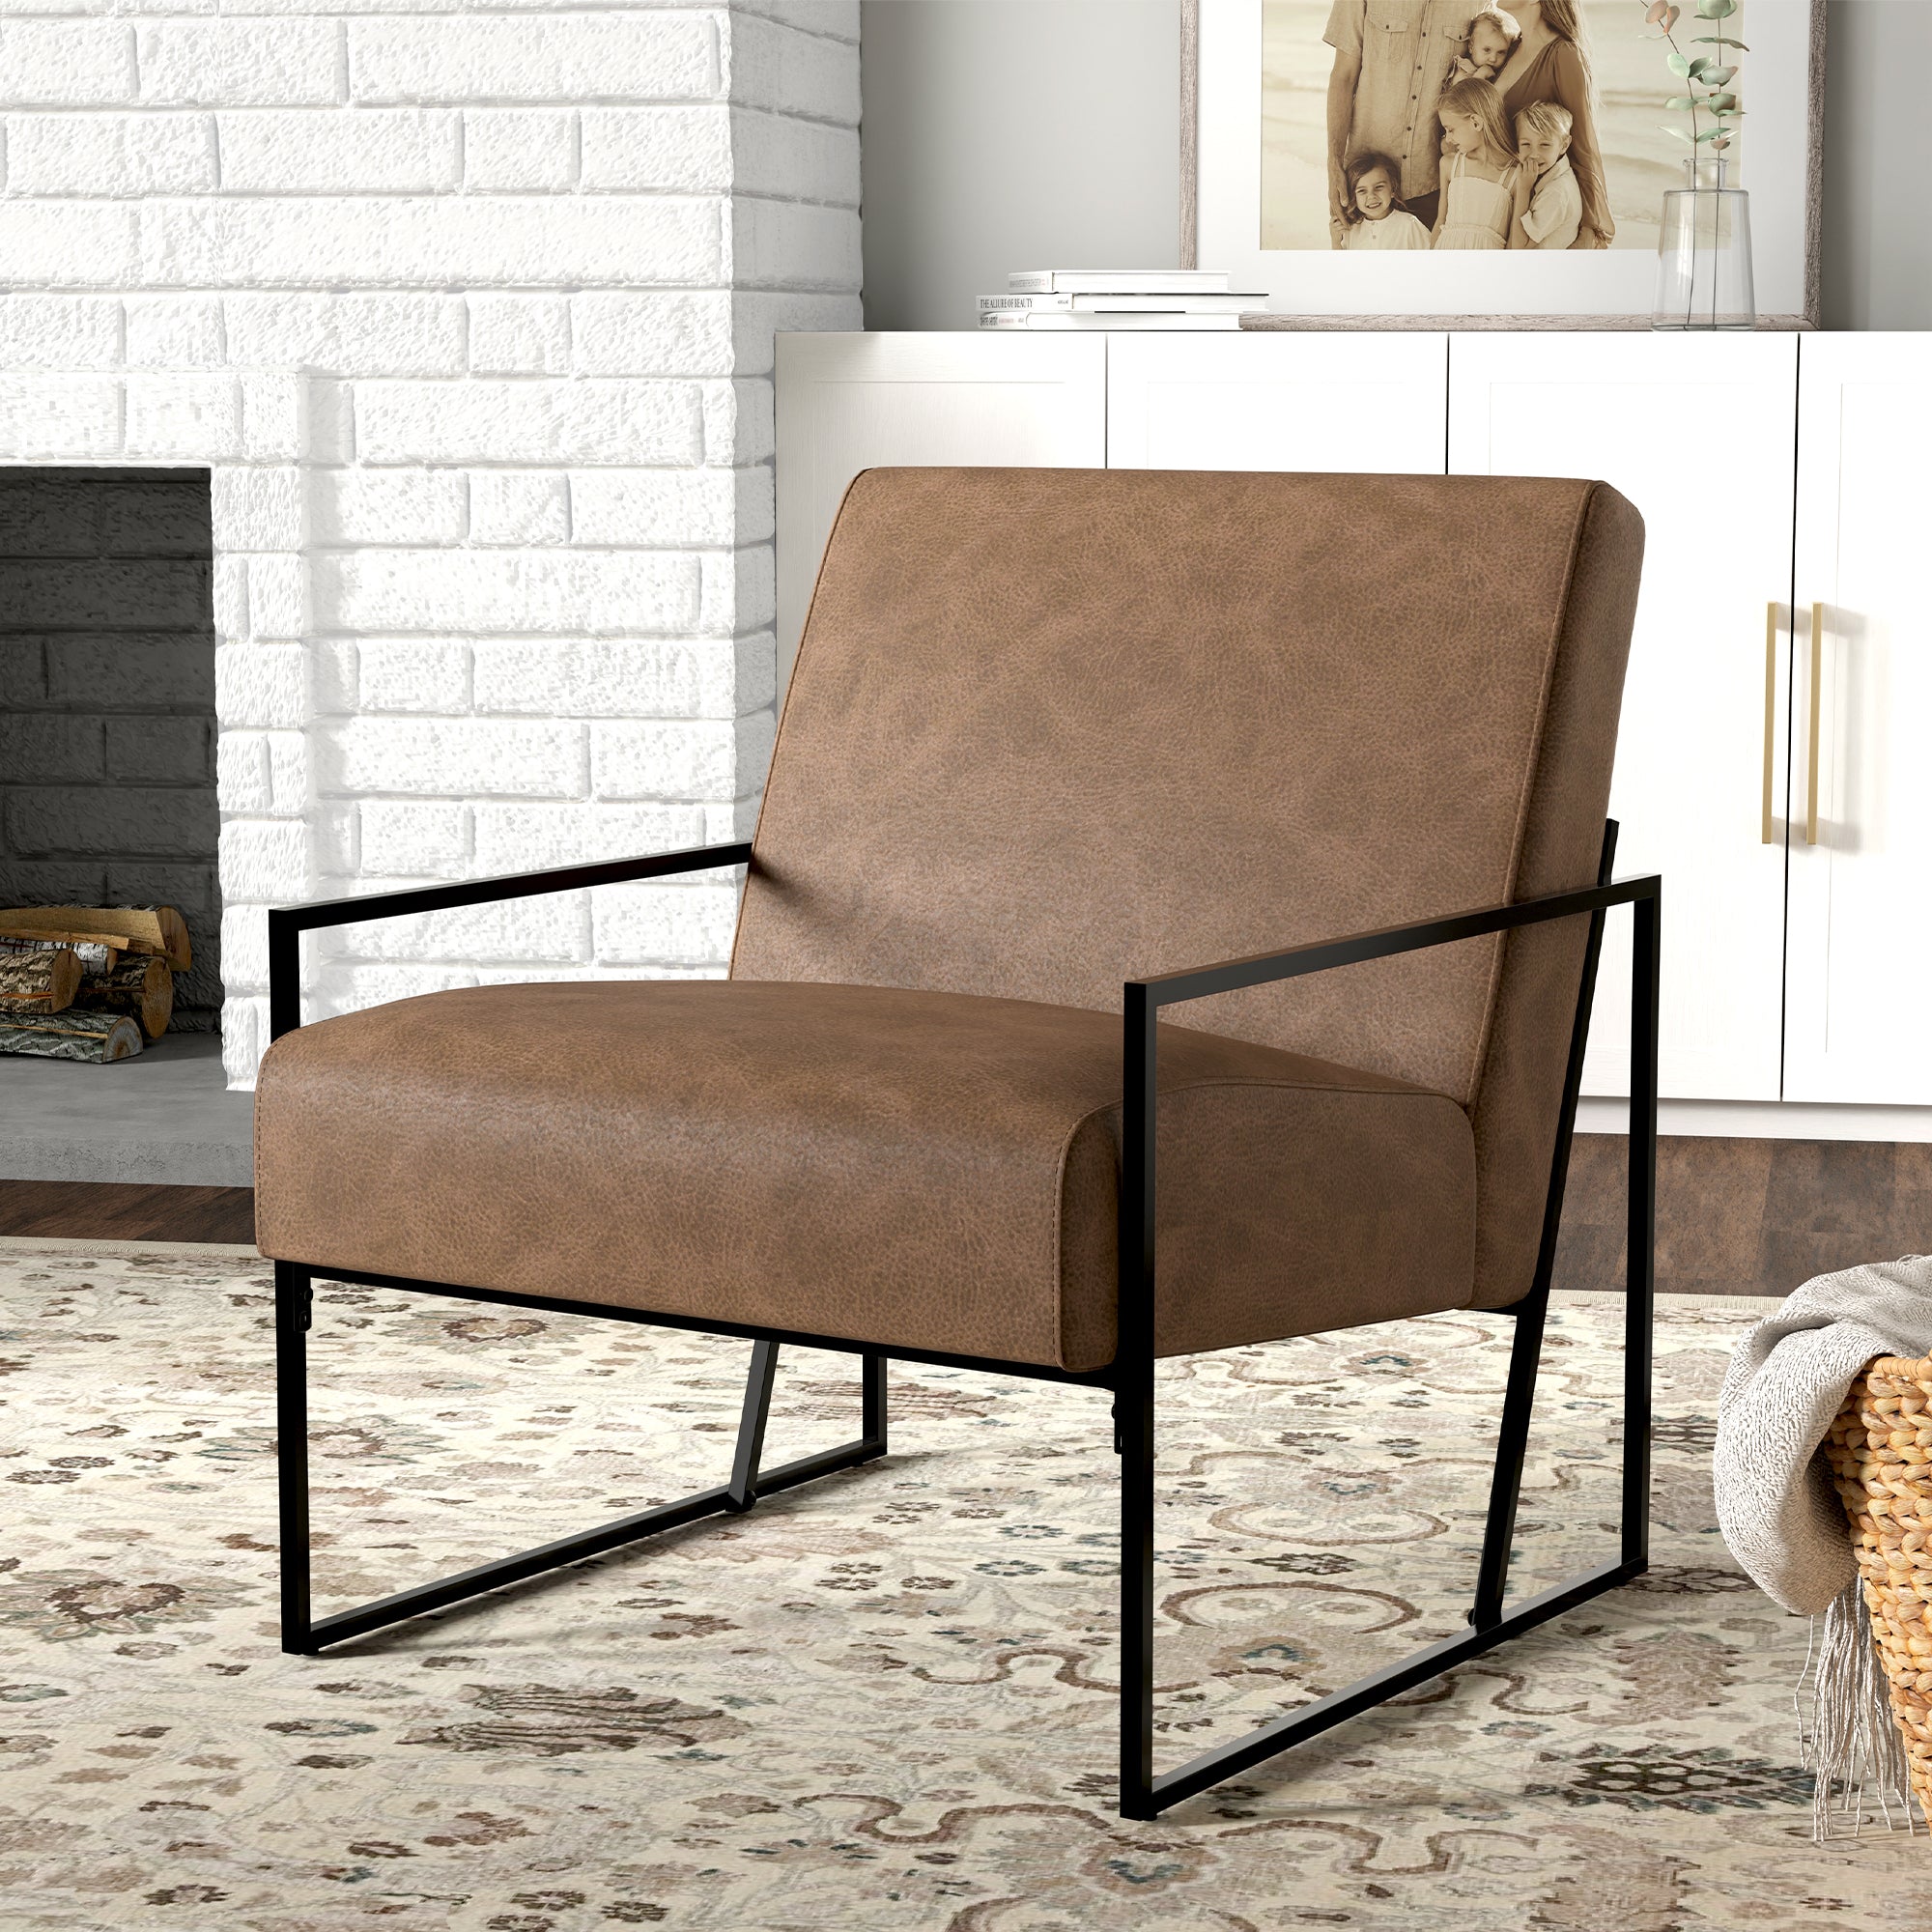 Modern Industrial Upholstered Accent Chair – Slanted Metal Base